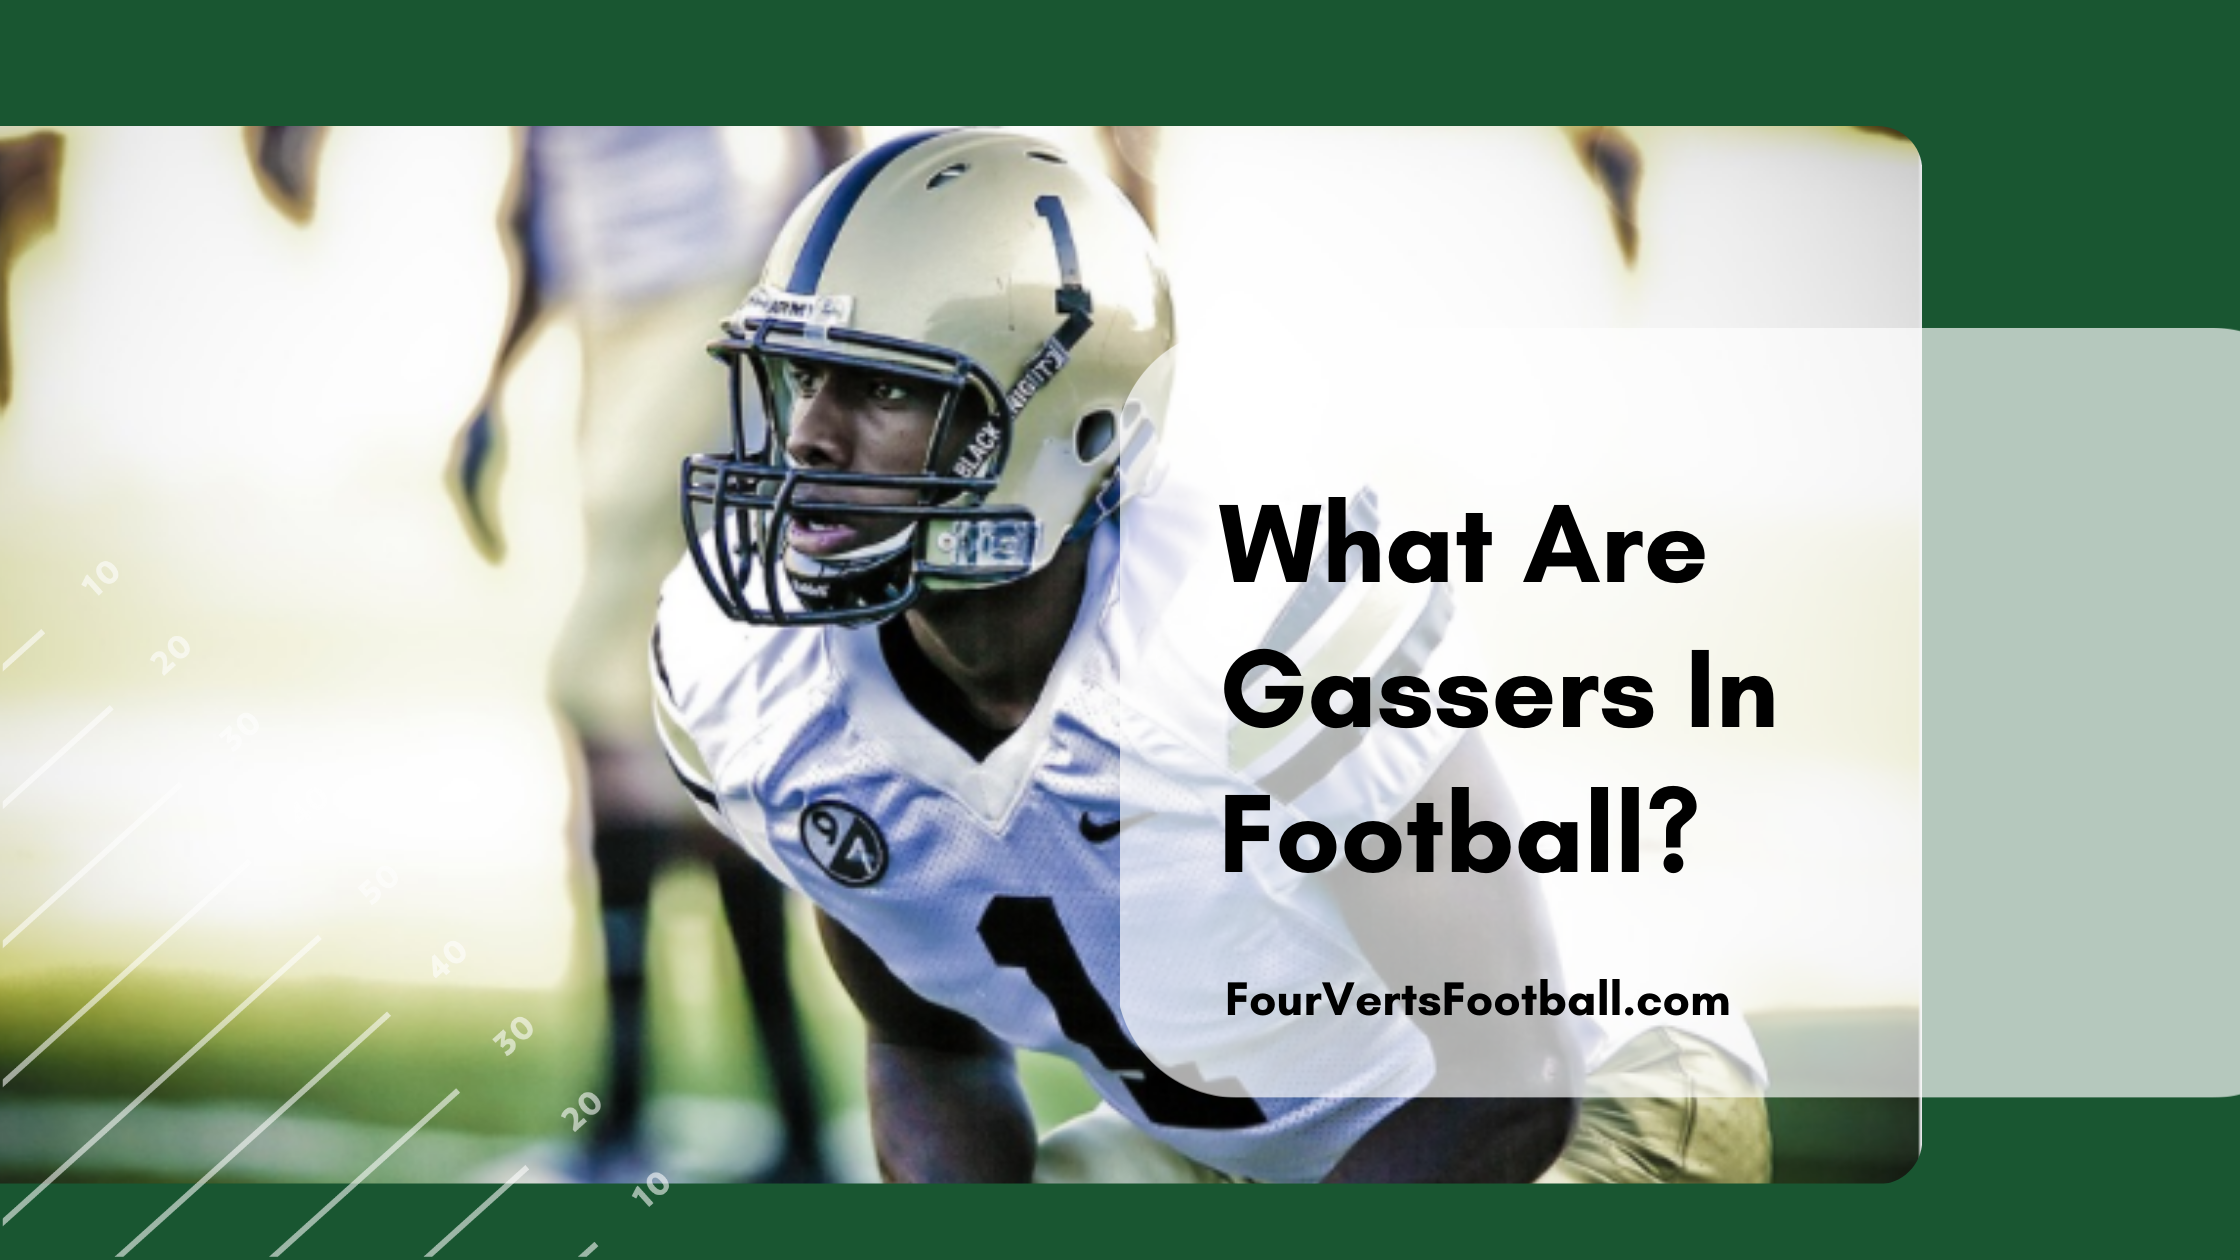 What Are Gassers In Football?